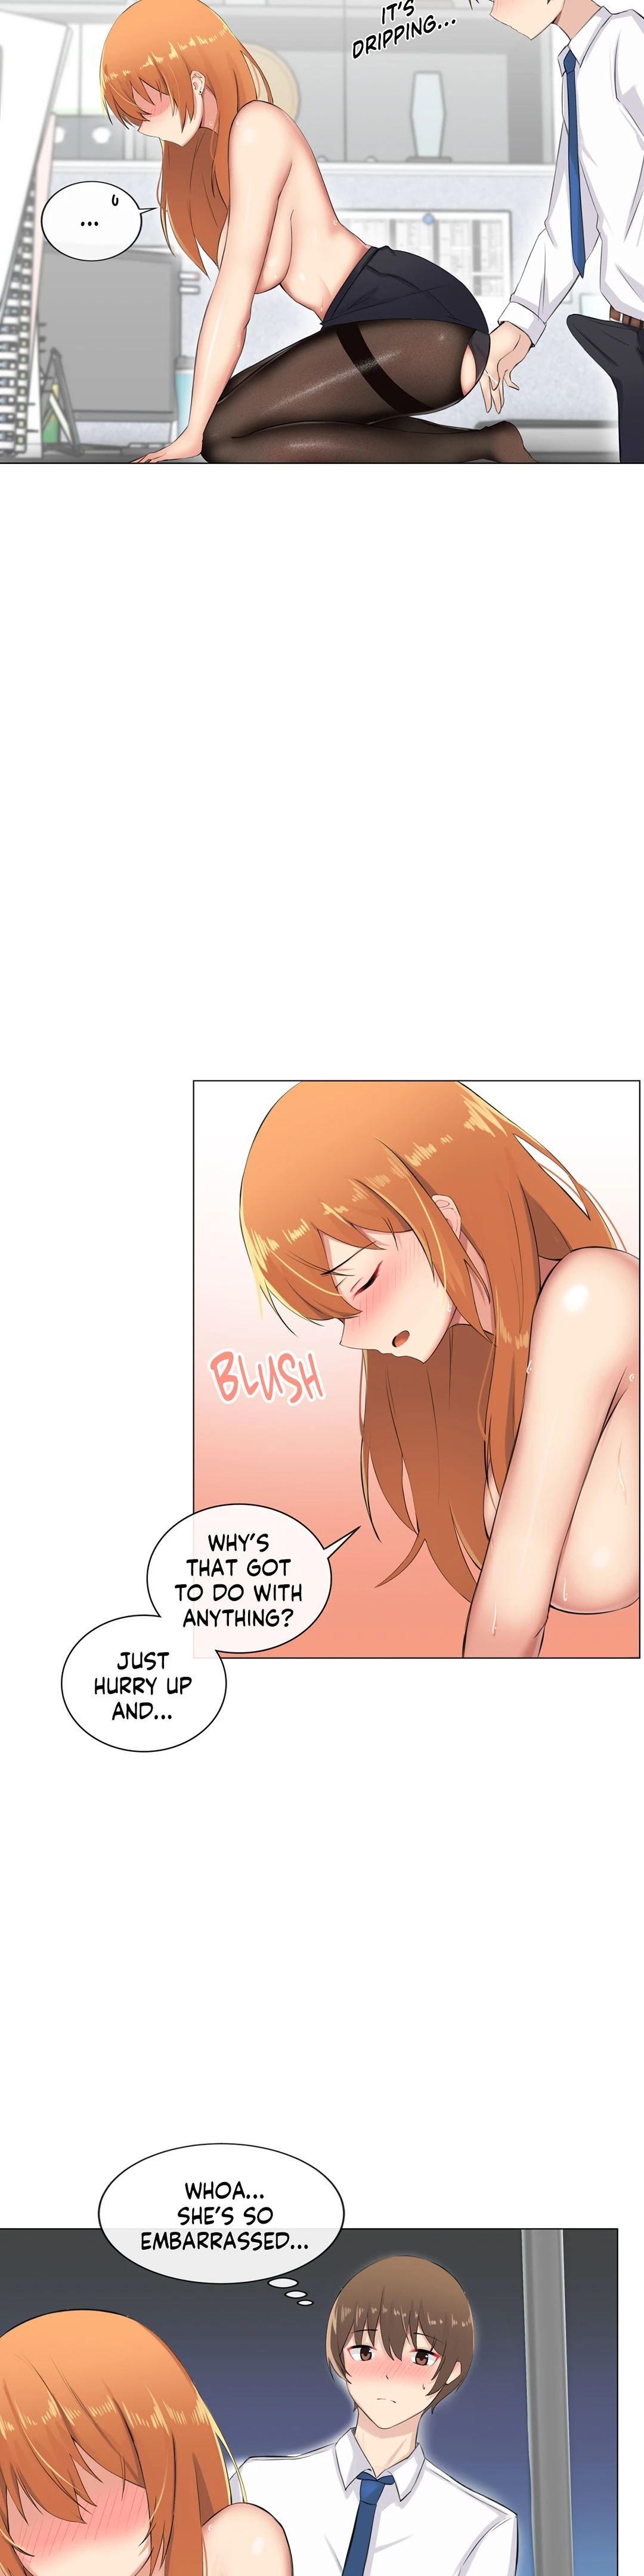 [Dumangoon, 130F] Sexcape Room: Pile Up Ch.9/9 [English] [Manhwa PDF] Completed 230